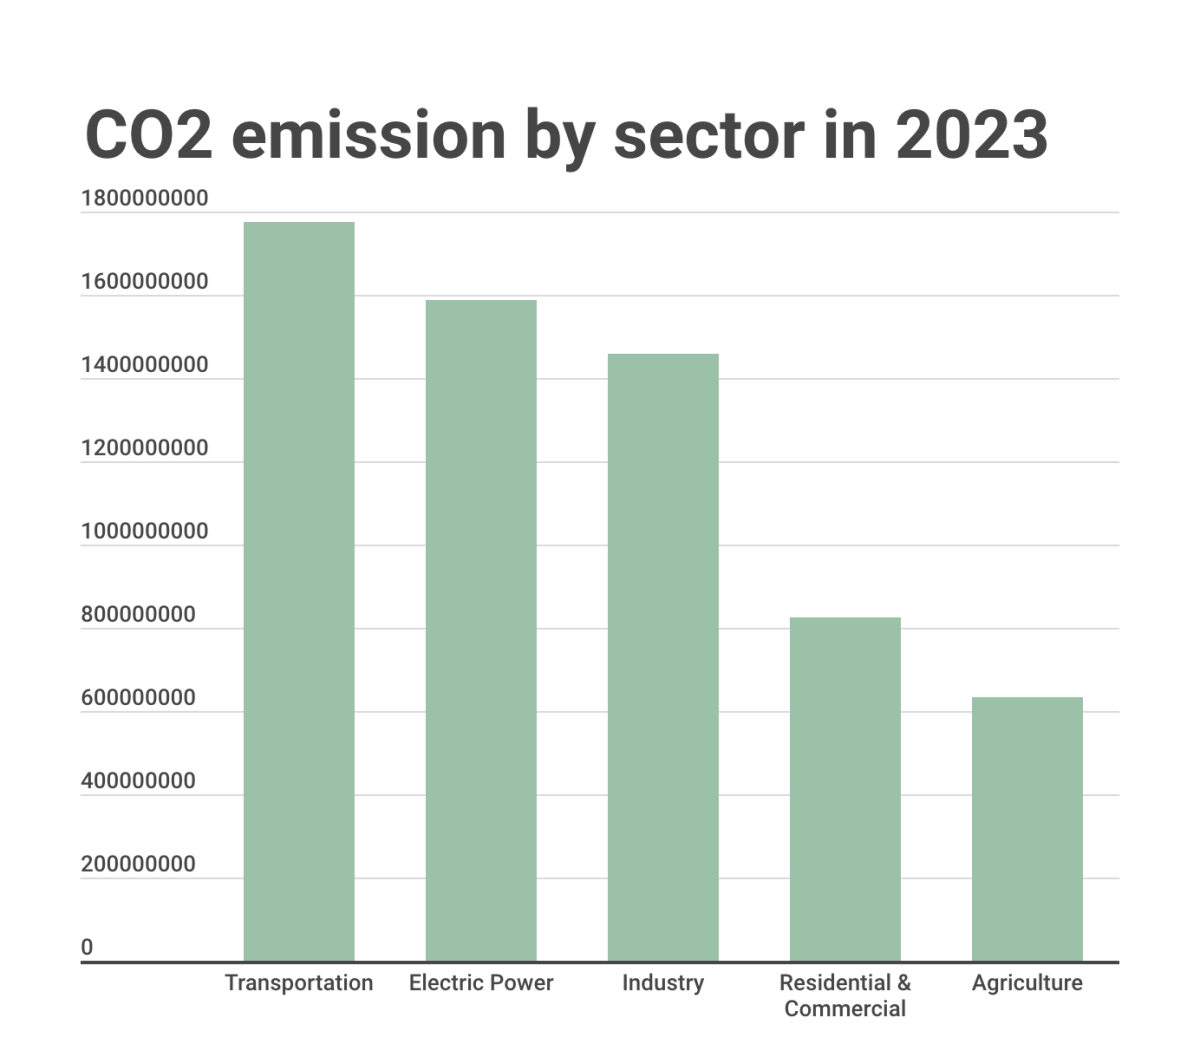 Industrial production takes third in the United States’ emissions. (INFORMATION: United States Environmental Protection Agency)